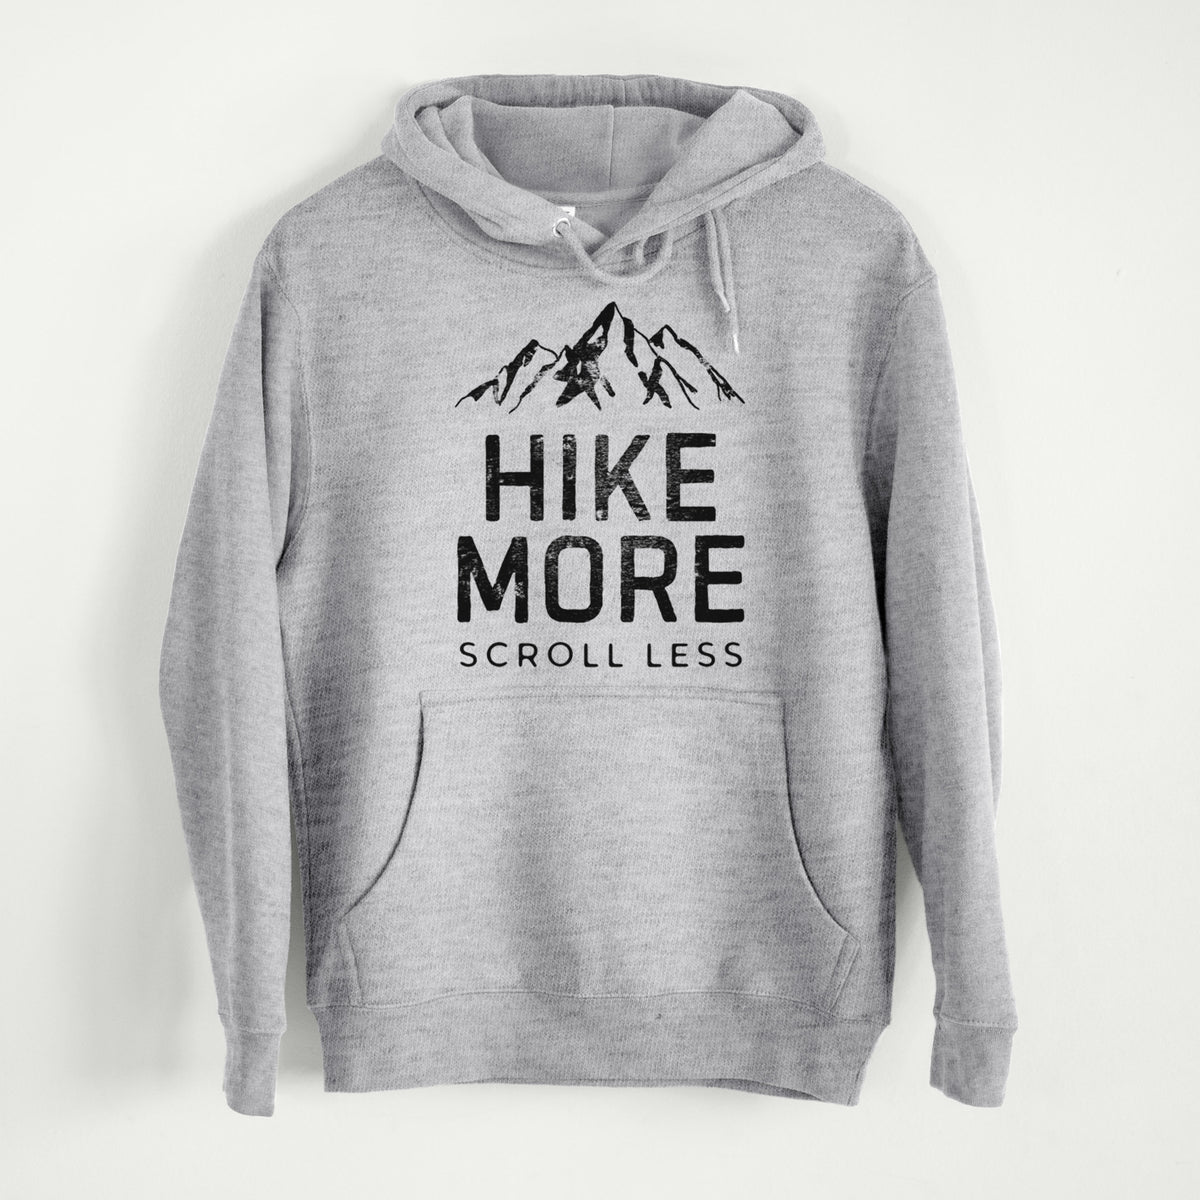 Hike More - Scroll Less  - Mid-Weight Unisex Premium Blend Hoodie